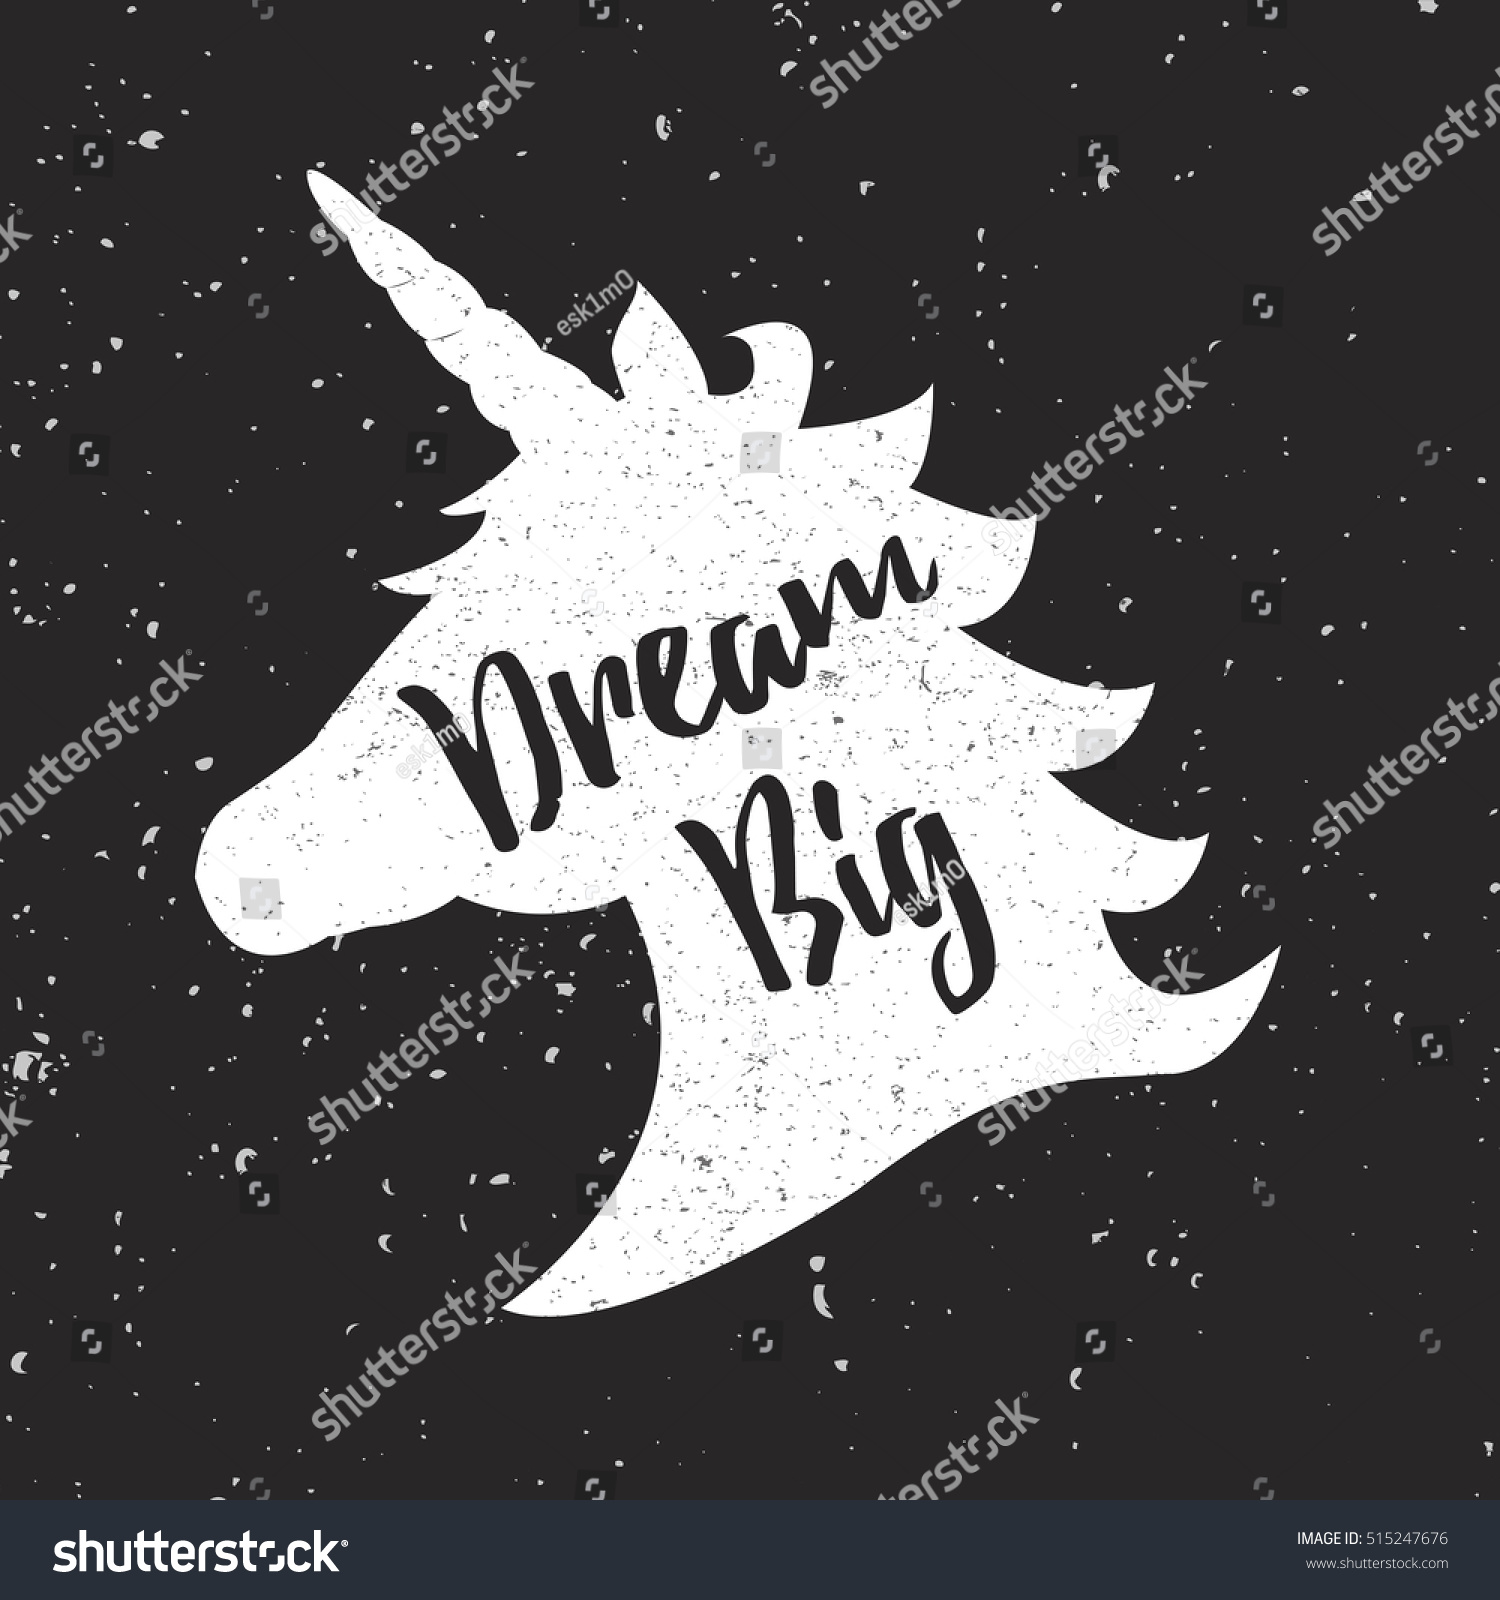 Download Silhouette Unicorn Inspirational Quote Isolated On Stock ...